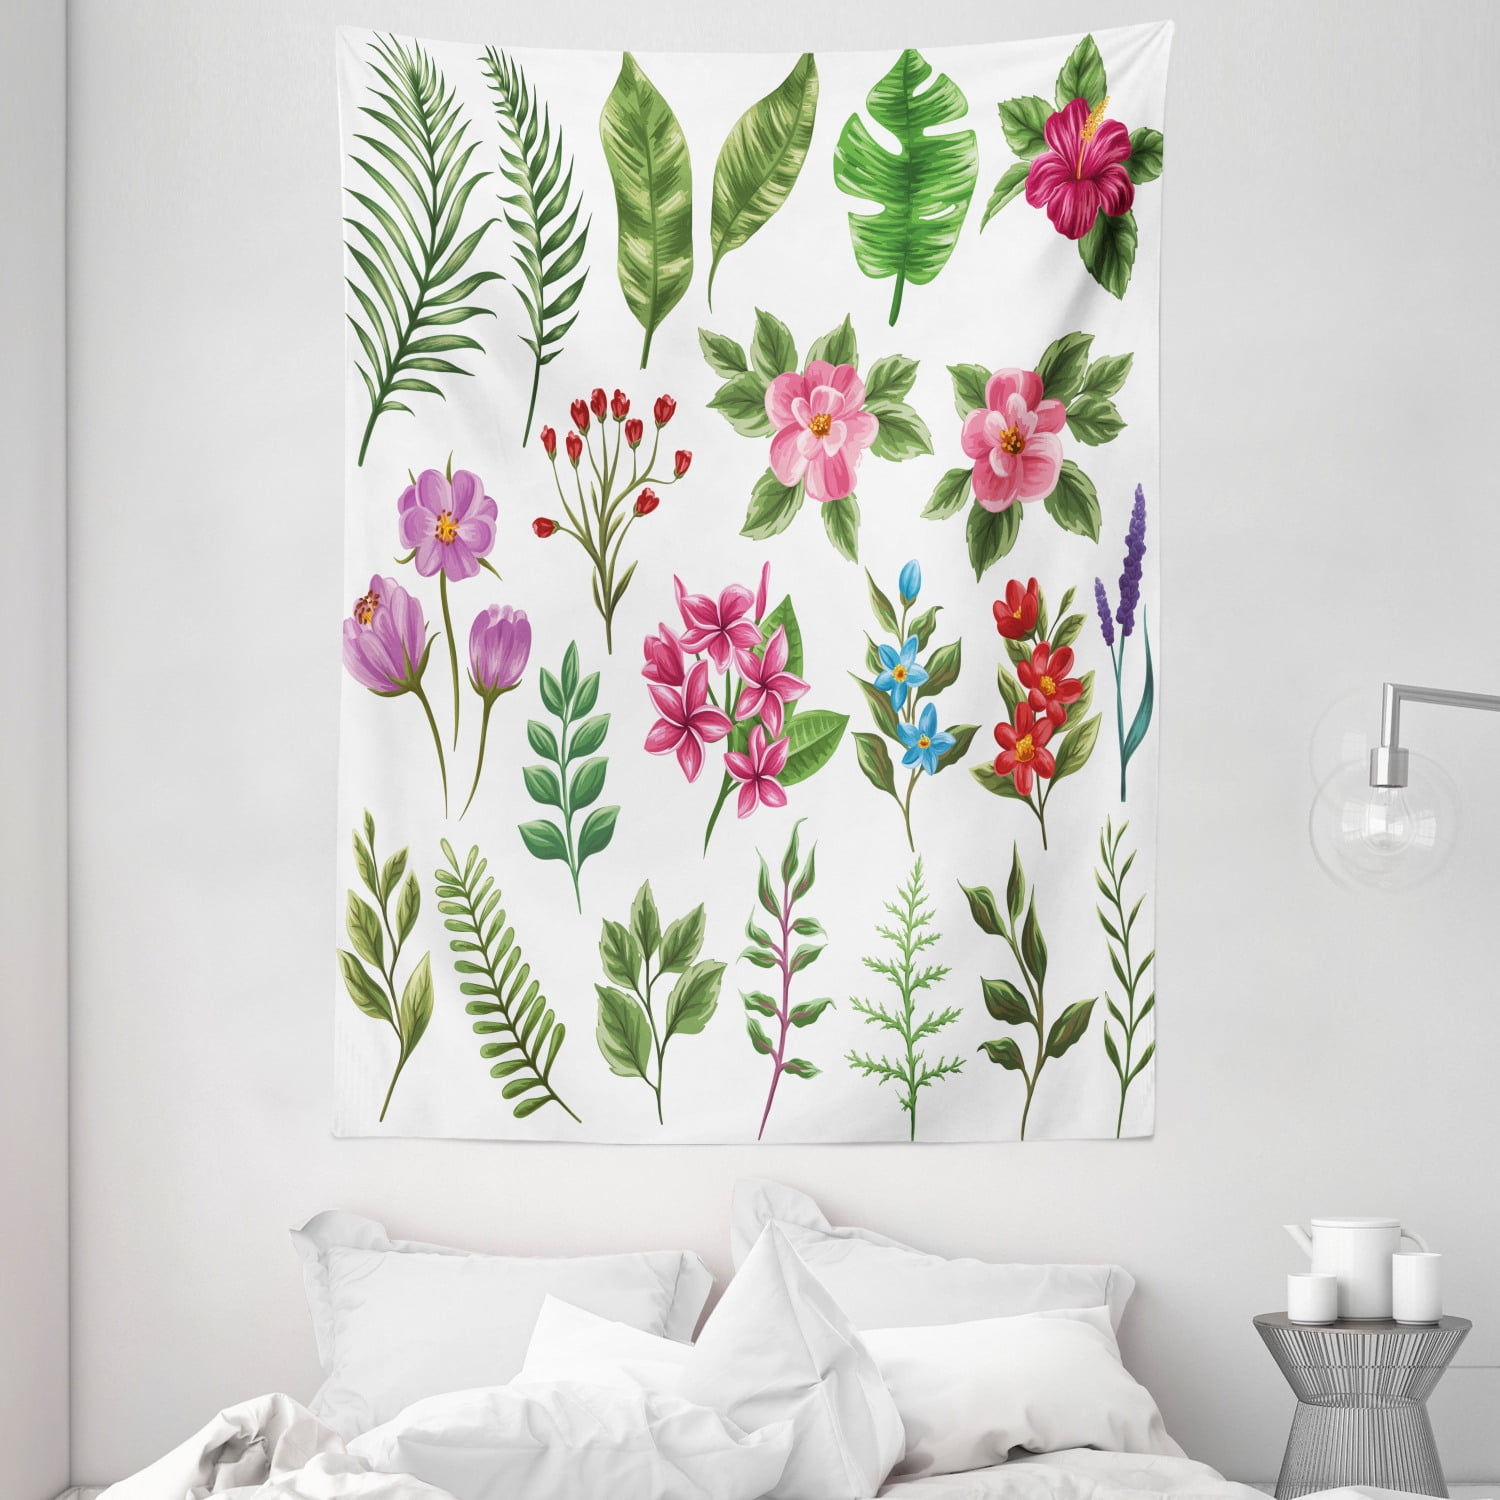 Simple Art Flower＆ Plant Print Tapestry Hippie Wall Hanging Home Decor Bedspread 